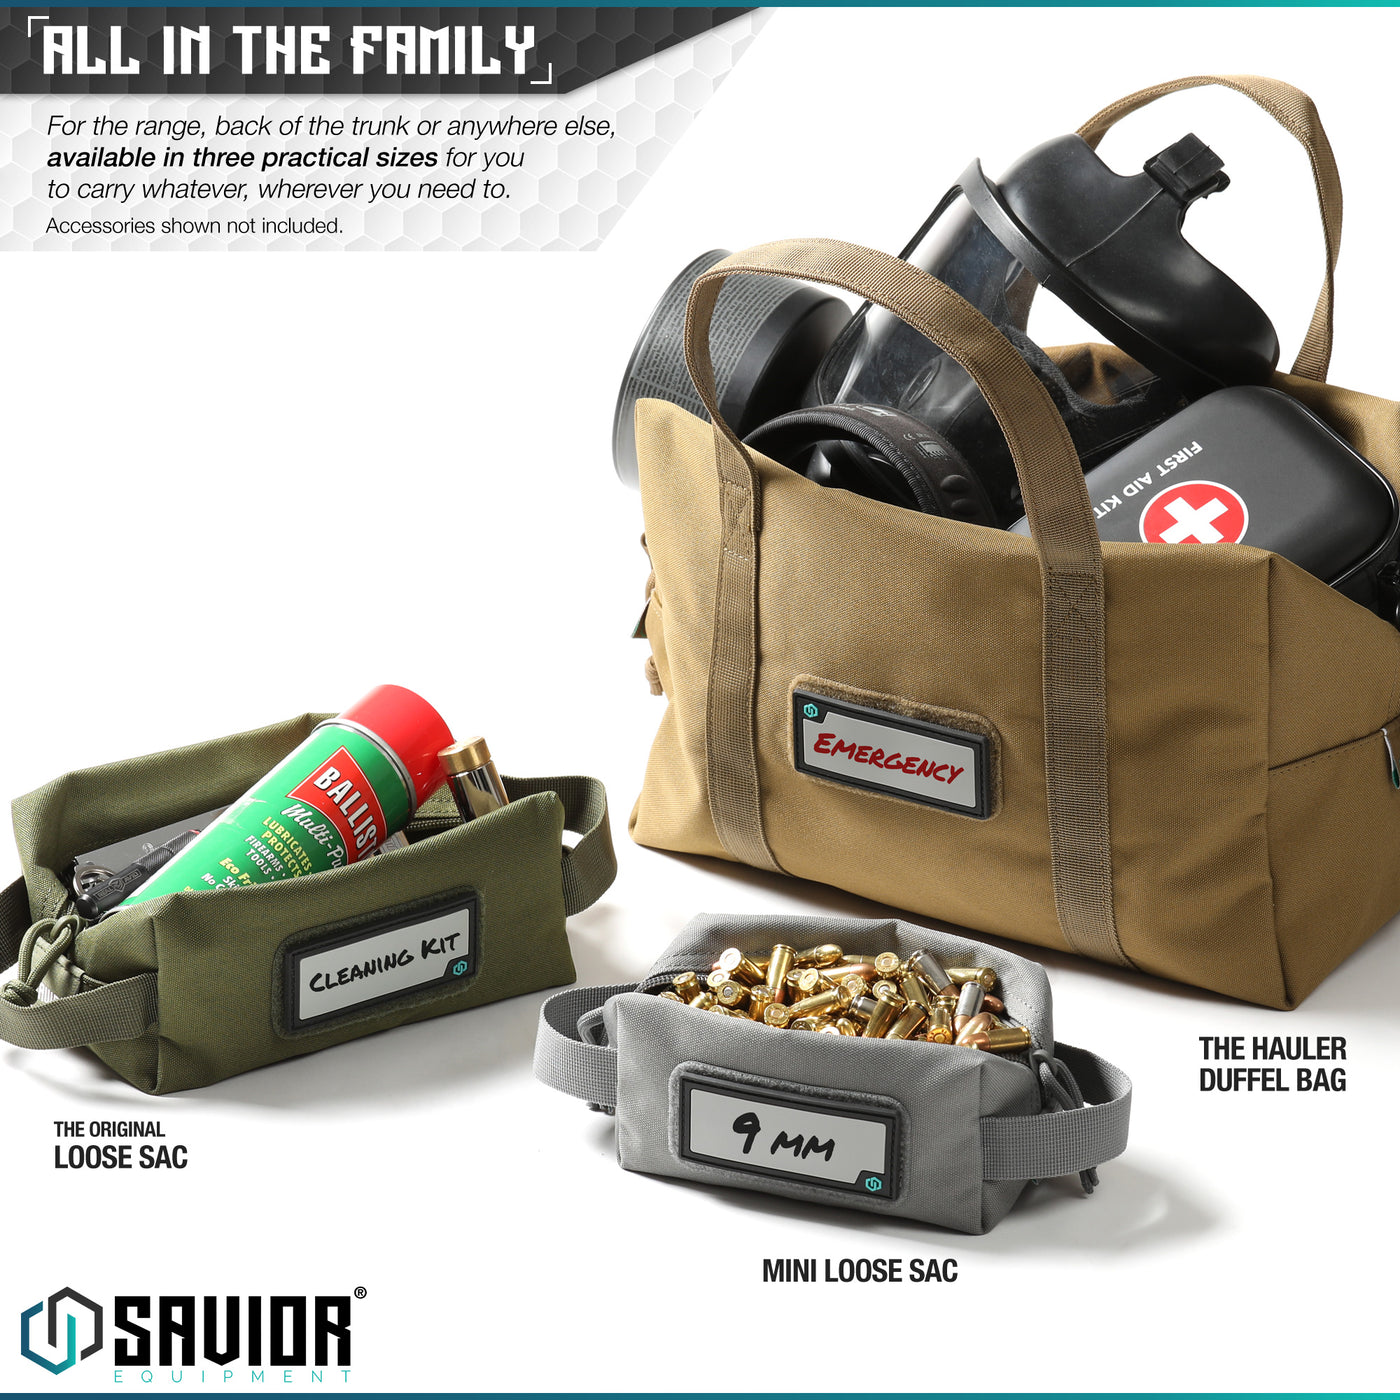 All In The Family - For the range, back of the trunk or anywhere else, available in three practical sizes for you to carry whatever, wherever you need to.